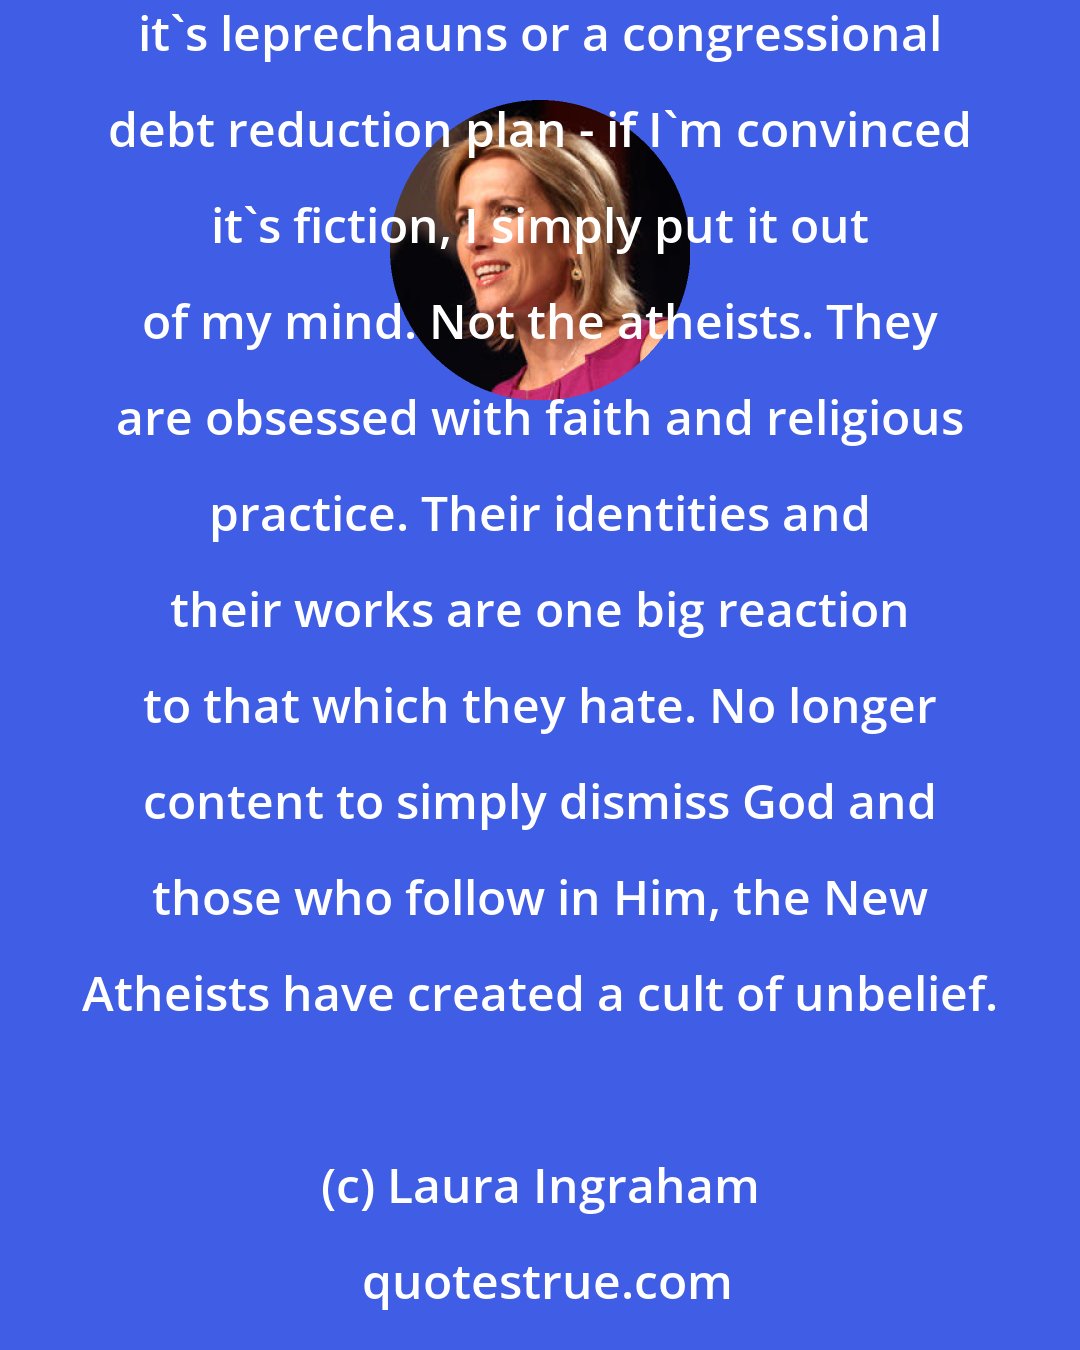 Laura Ingraham: When did atheists become so evangelical? I mean, if you don't believe something to be true, wouldn't you just ignore it? That's certainly what I do. Whether it's leprechauns or a congressional debt reduction plan - if I'm convinced it's fiction, I simply put it out of my mind. Not the atheists. They are obsessed with faith and religious practice. Their identities and their works are one big reaction to that which they hate. No longer content to simply dismiss God and those who follow in Him, the New Atheists have created a cult of unbelief.